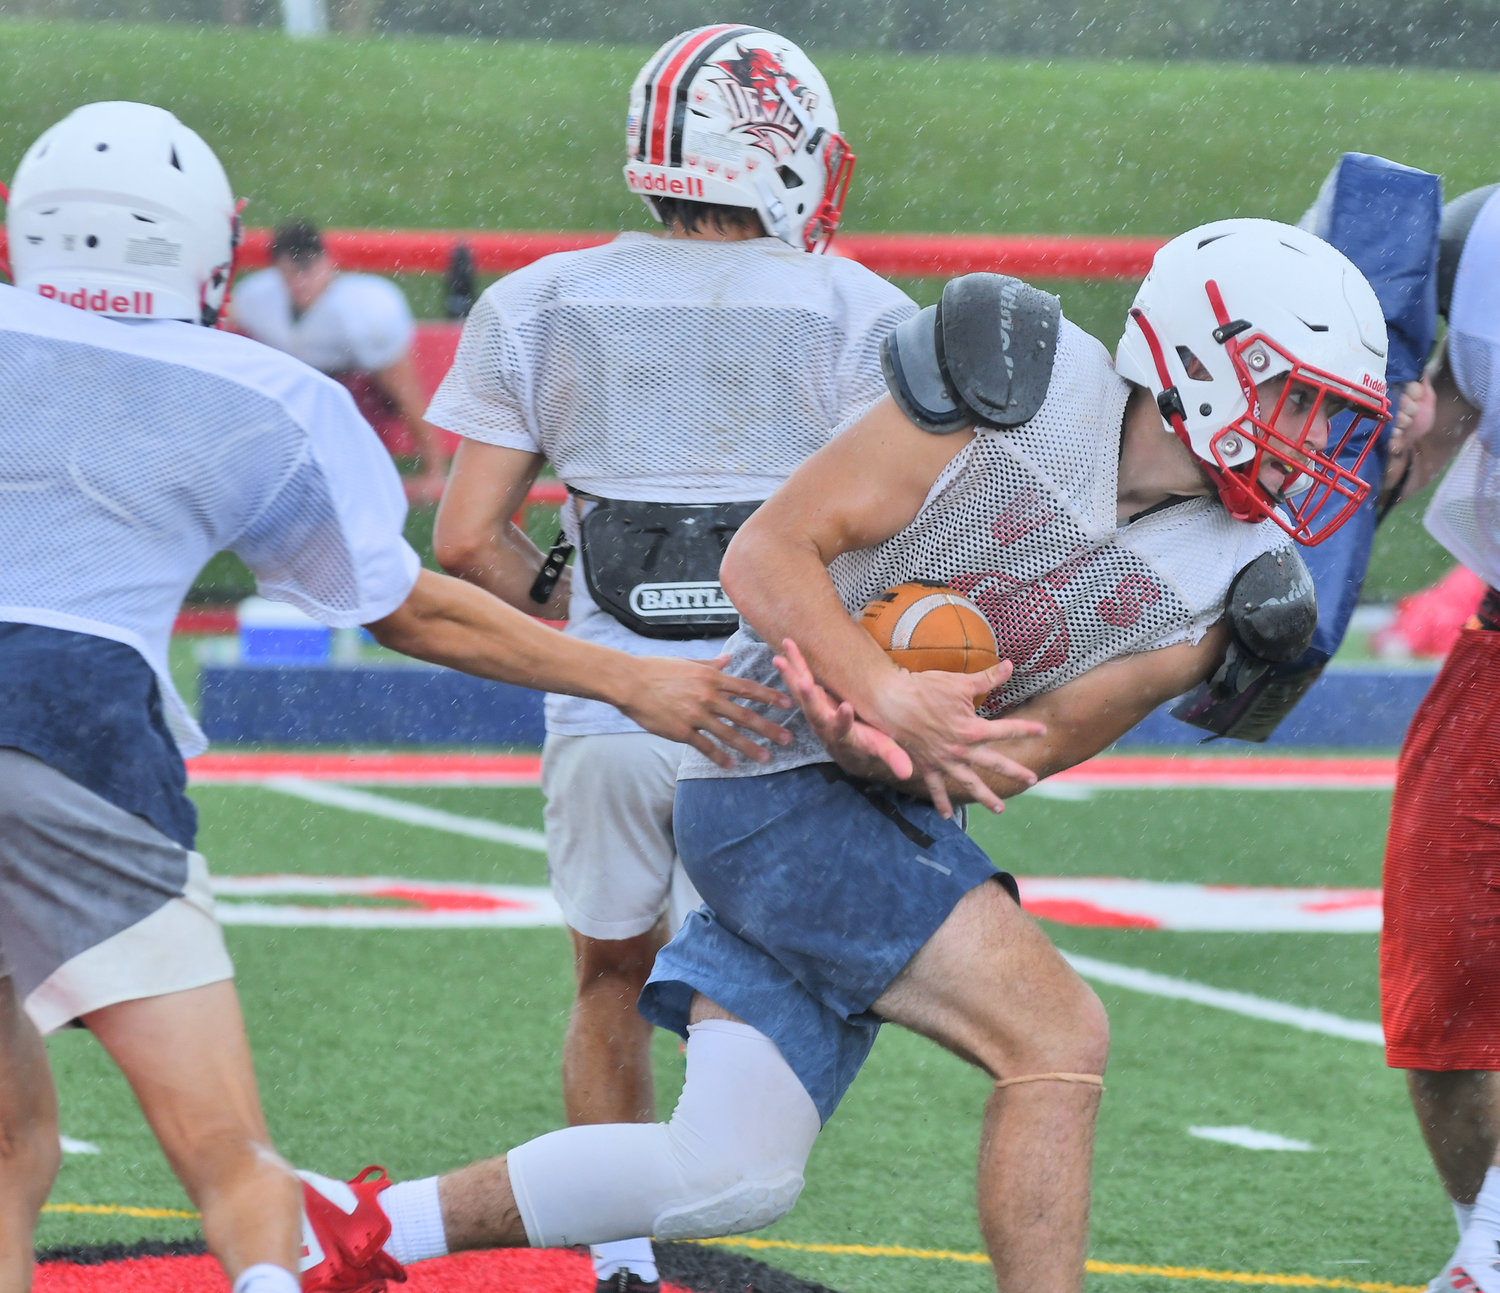 Vernon-Verona-Sherrill senior fullback Matt Rossi takes a handoff from Charlie Foster at Cheveron Field during a preseason practice. Rossi will get carries but his bigger role for the Red Devils will likely be to clear the way for running back James Wheeler IV.